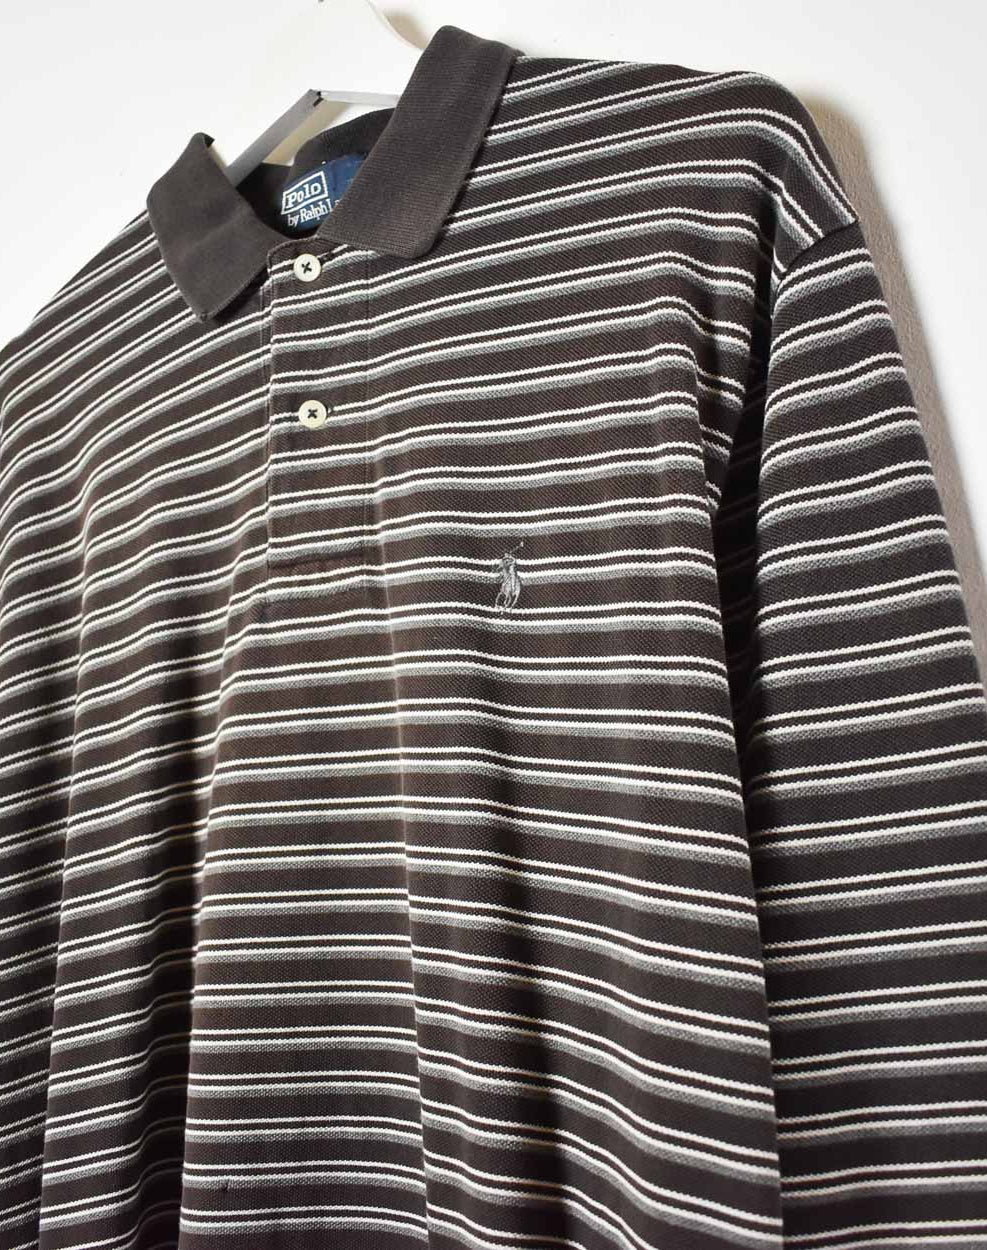 Brown Polo Ralph Lauren Striped Long Sleeved Polo Shirt - Large